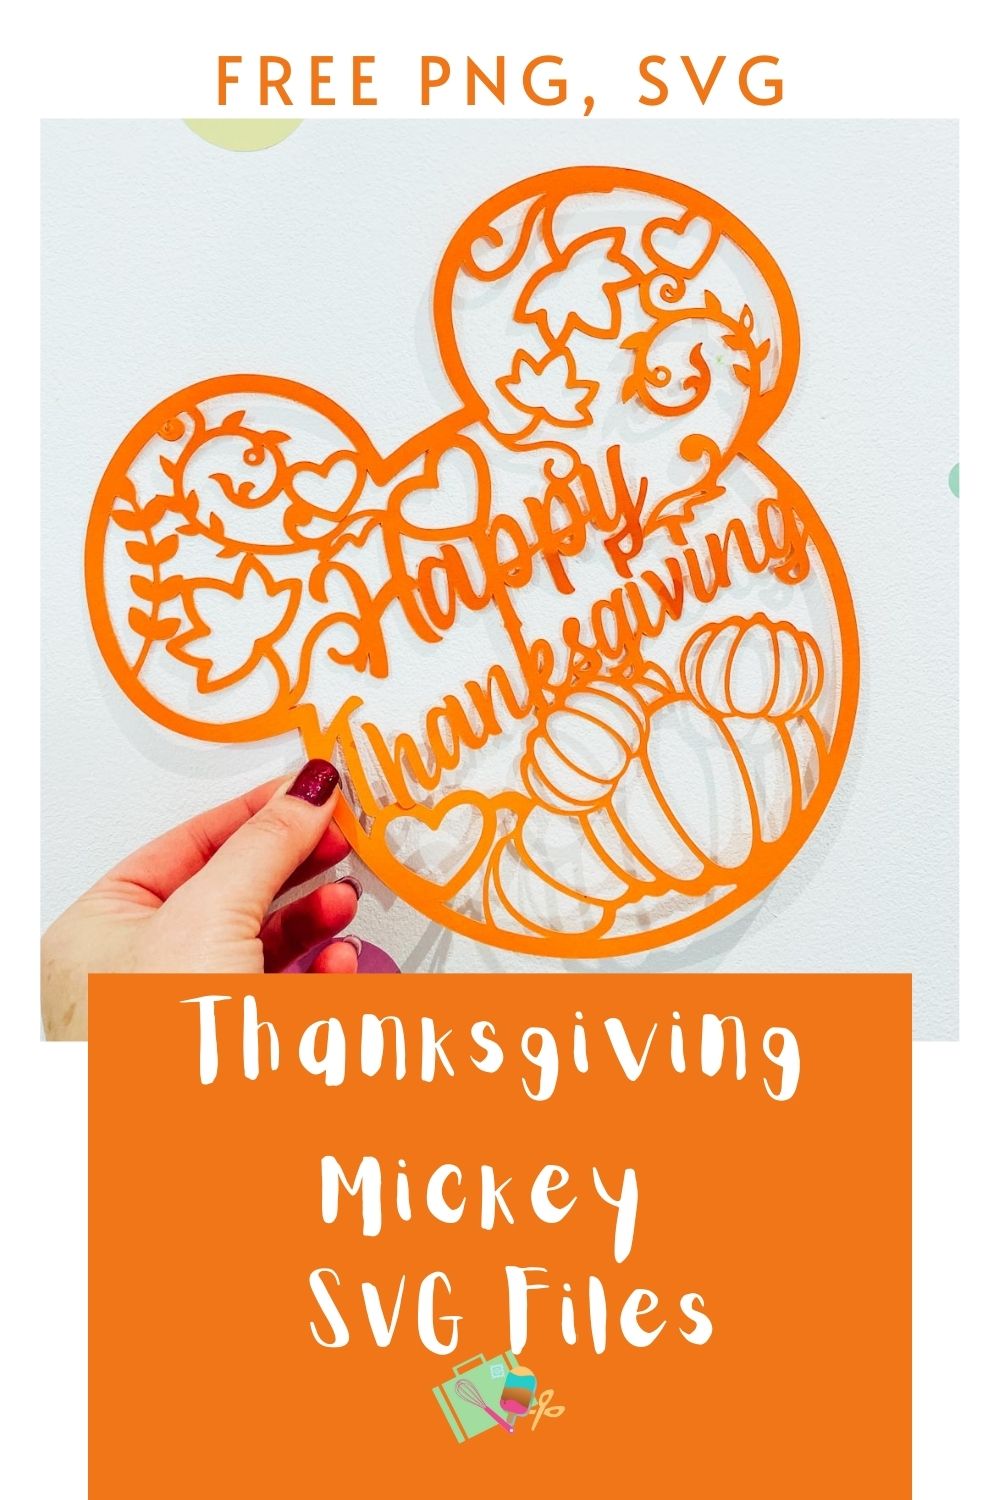 Thanksgiving Mickey Free SVG, PNG files for Crafting with Cricut or Silhouette